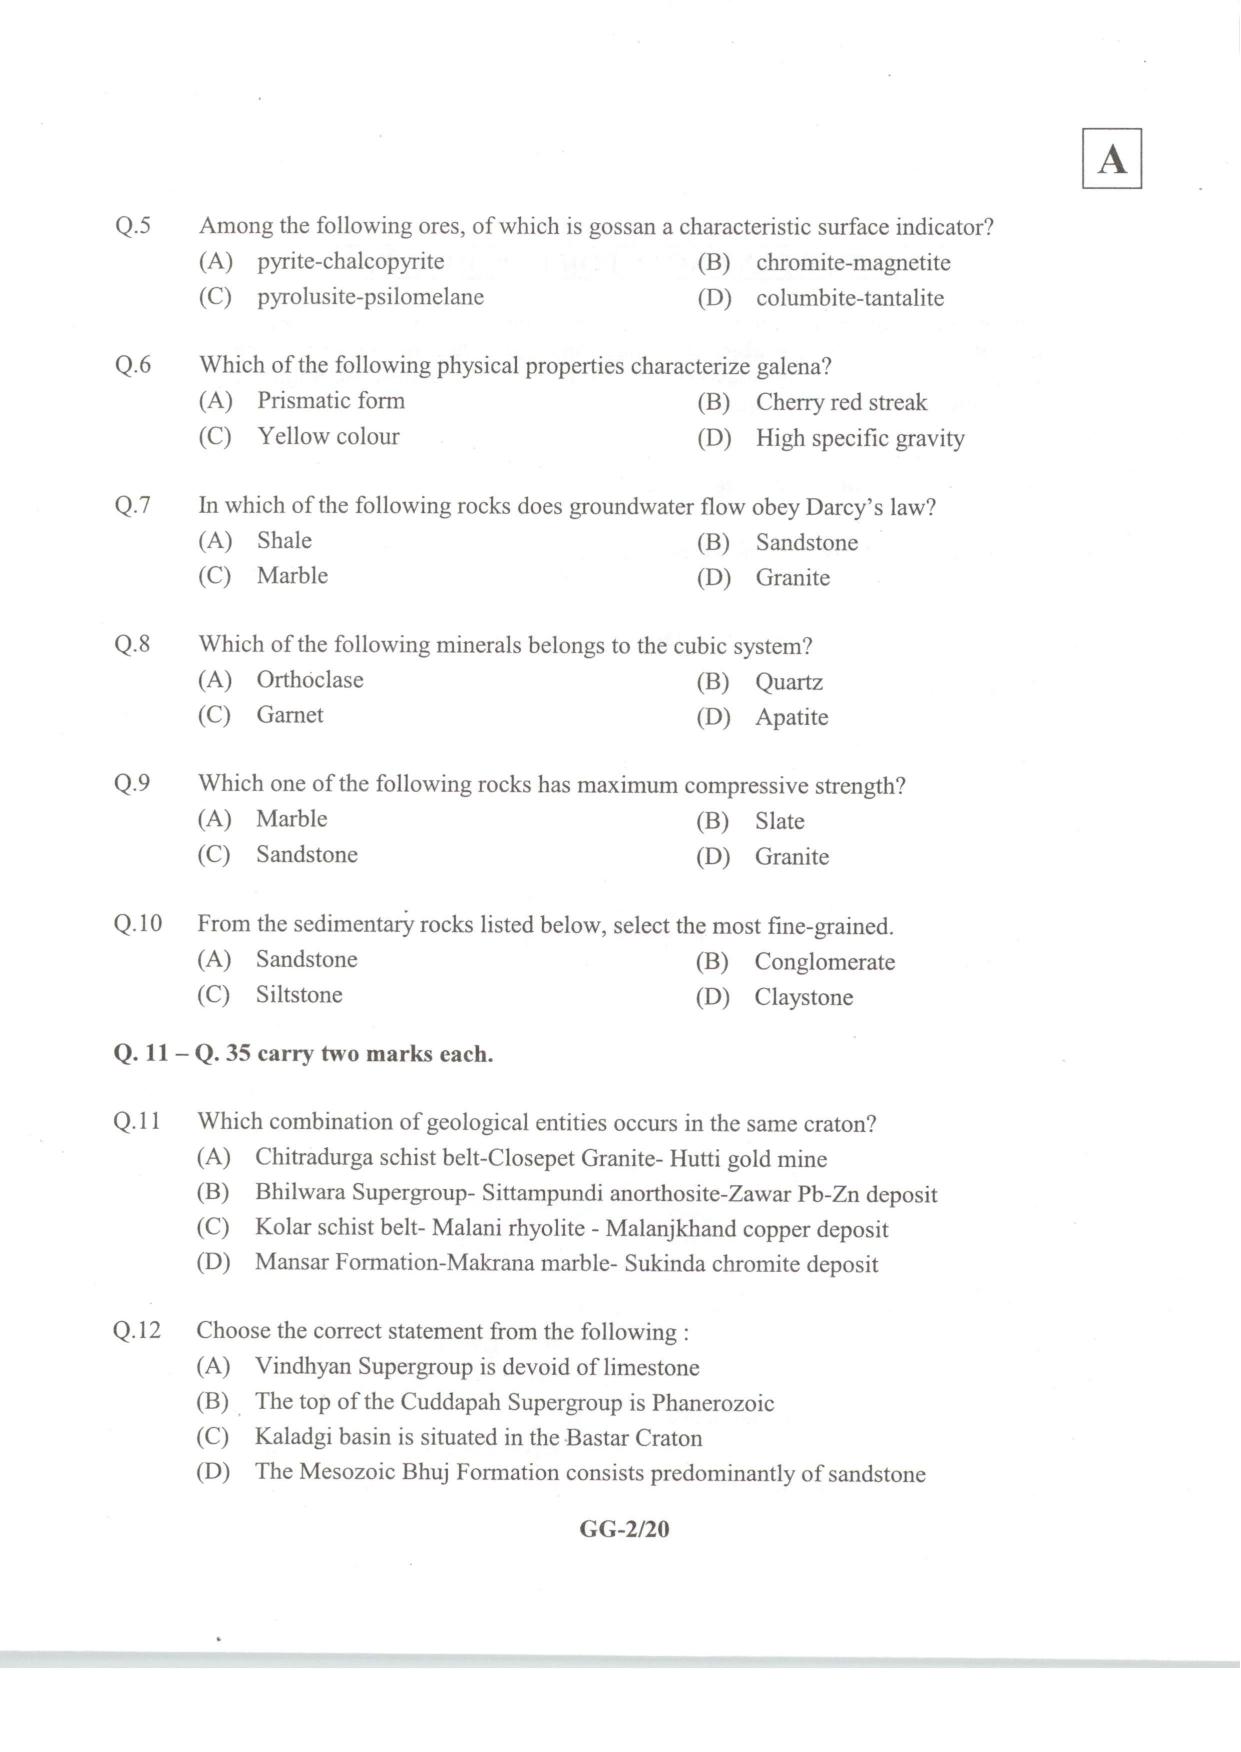 JAM 2014: GG Question Paper - Page 4